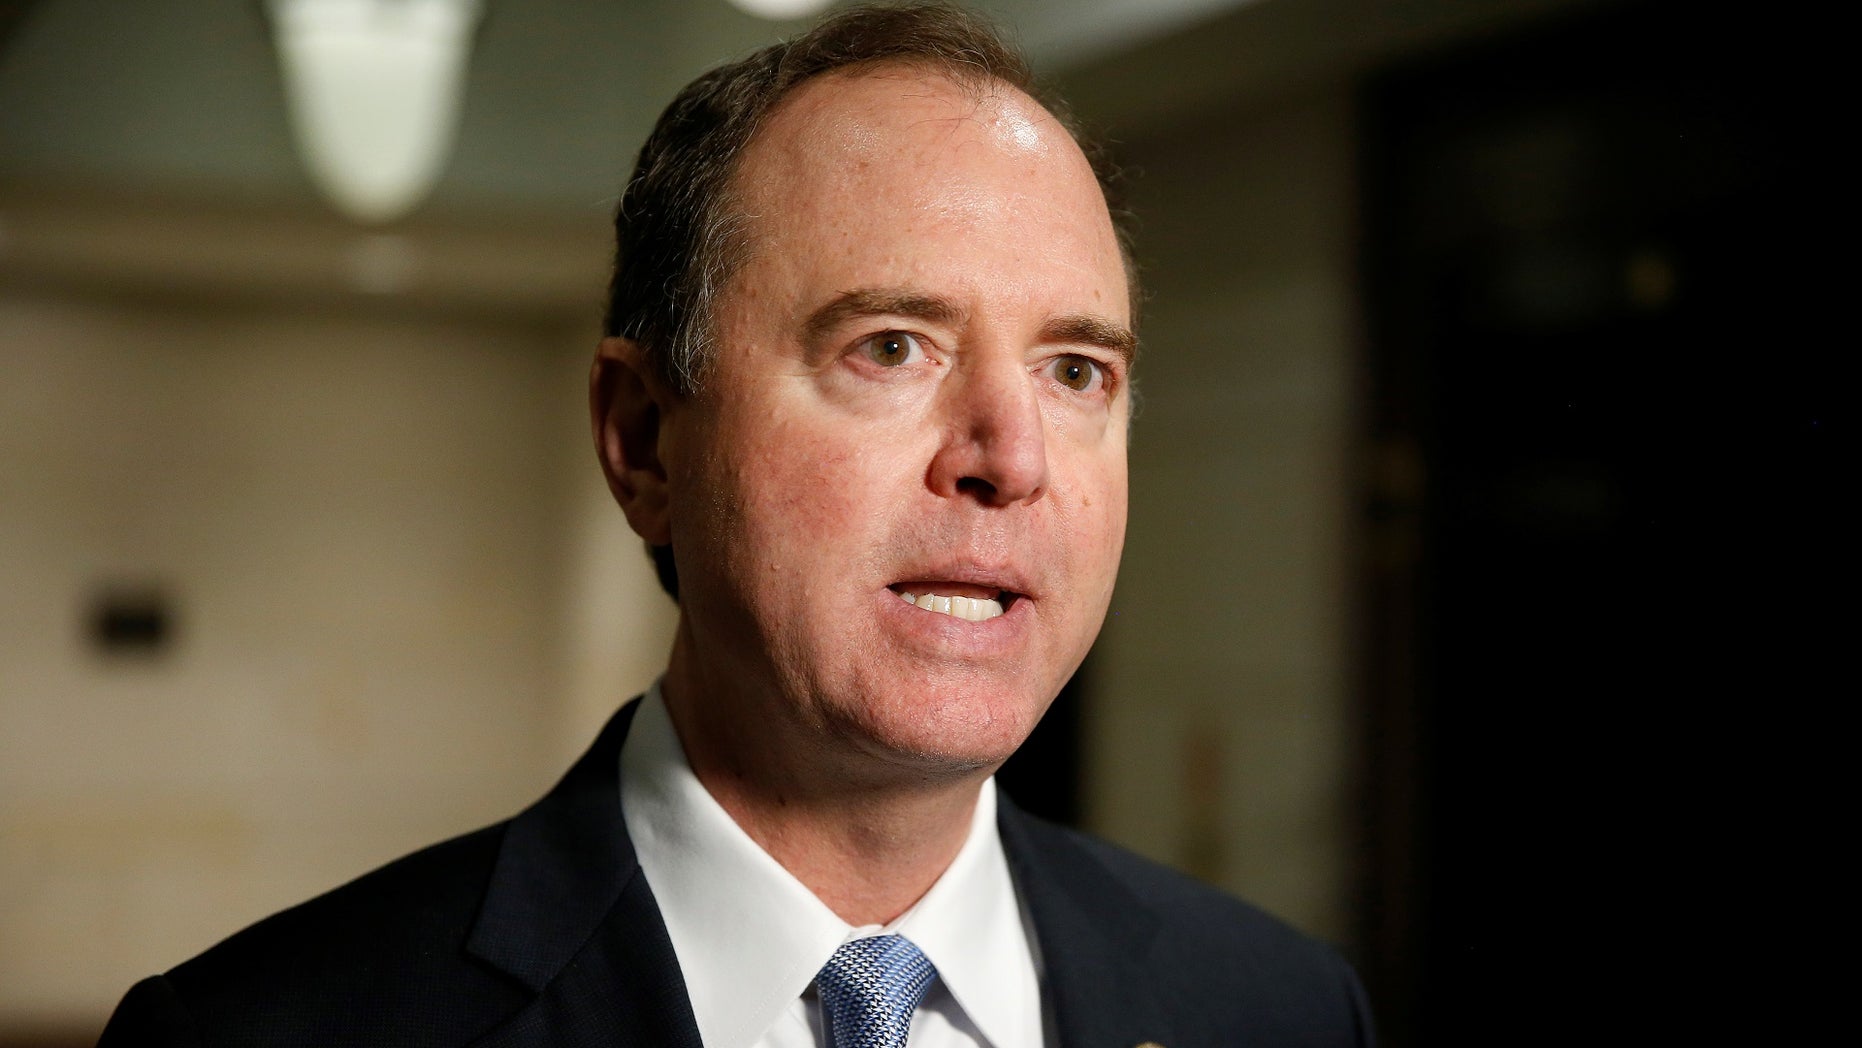 Representative Adam Schiff refuses to revisit Trump's guilt after the conclusion of Mueller's investigation, claiming that 